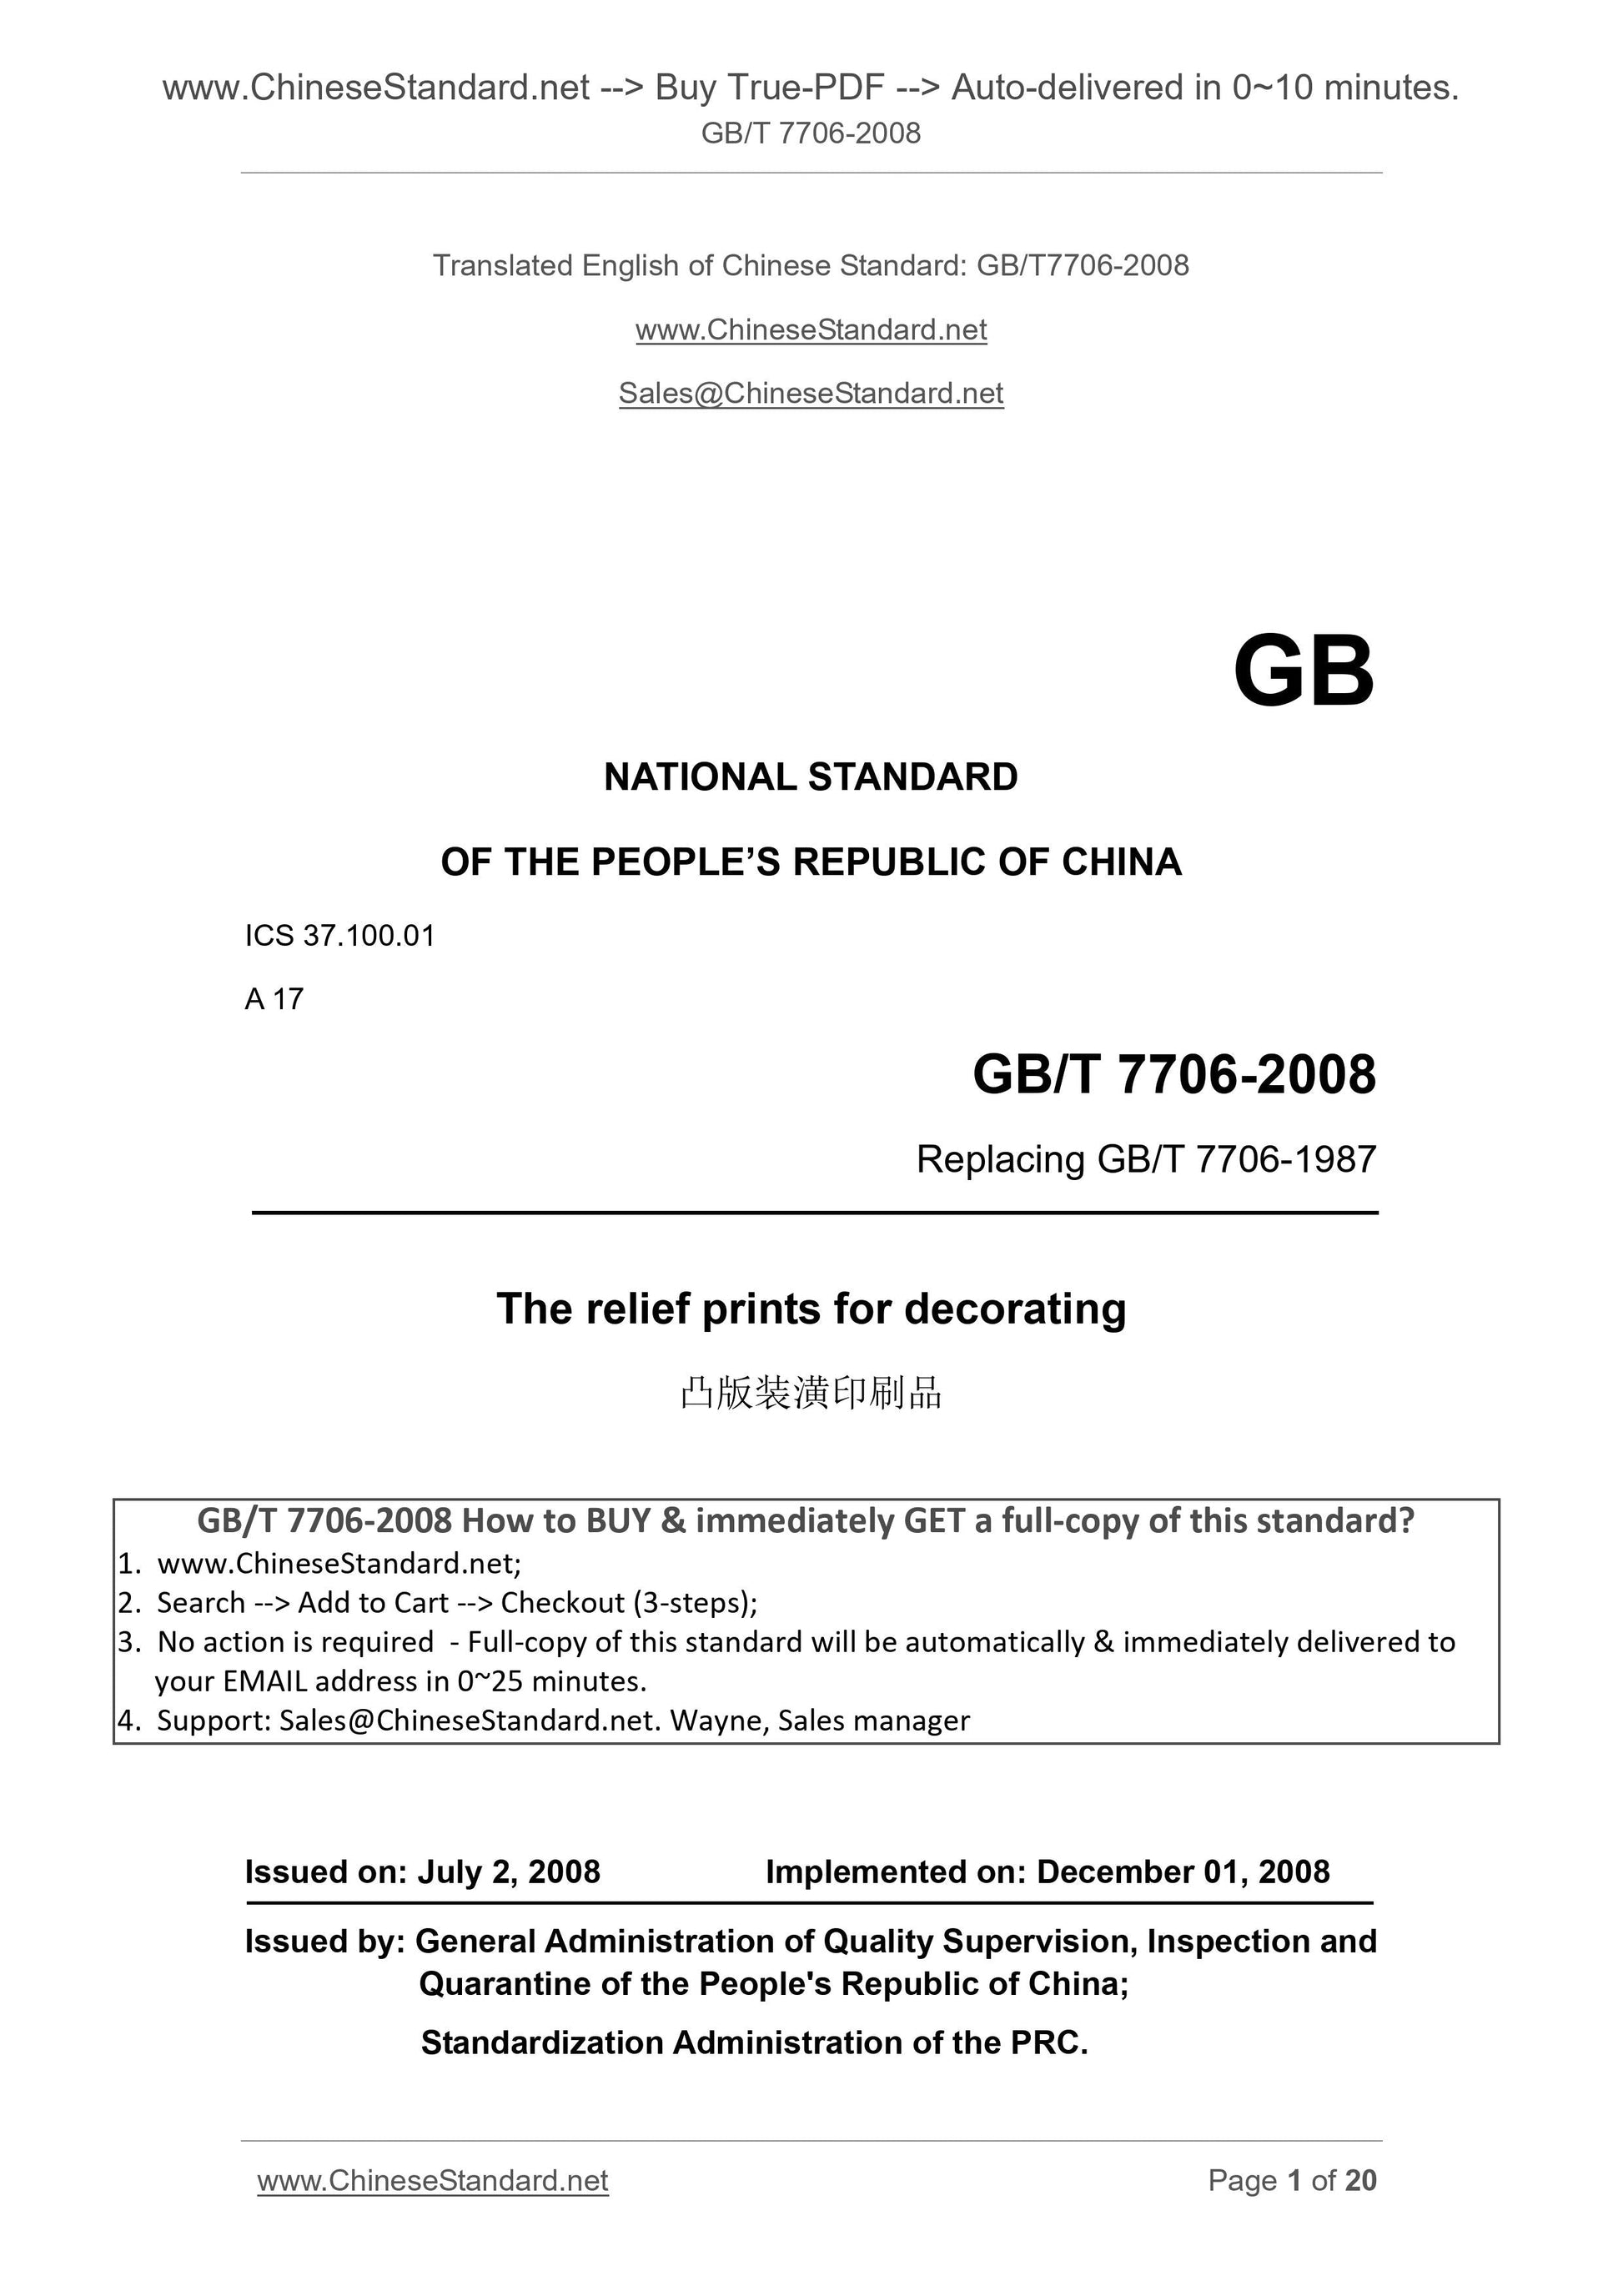 GB/T 7706-2008 Page 1